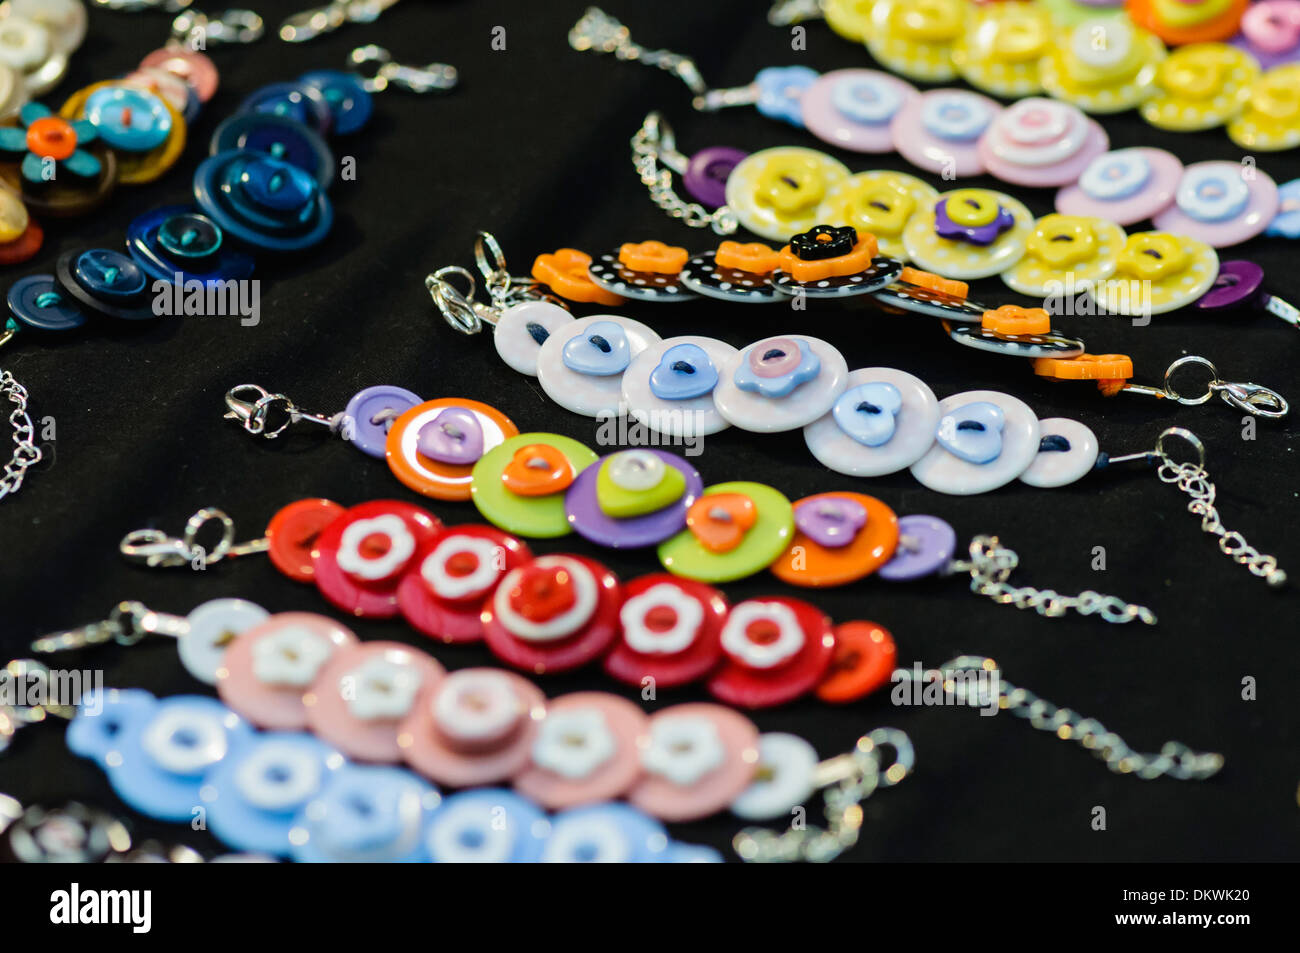 Jewelery made from buttons on sale at a market stall Stock Photo